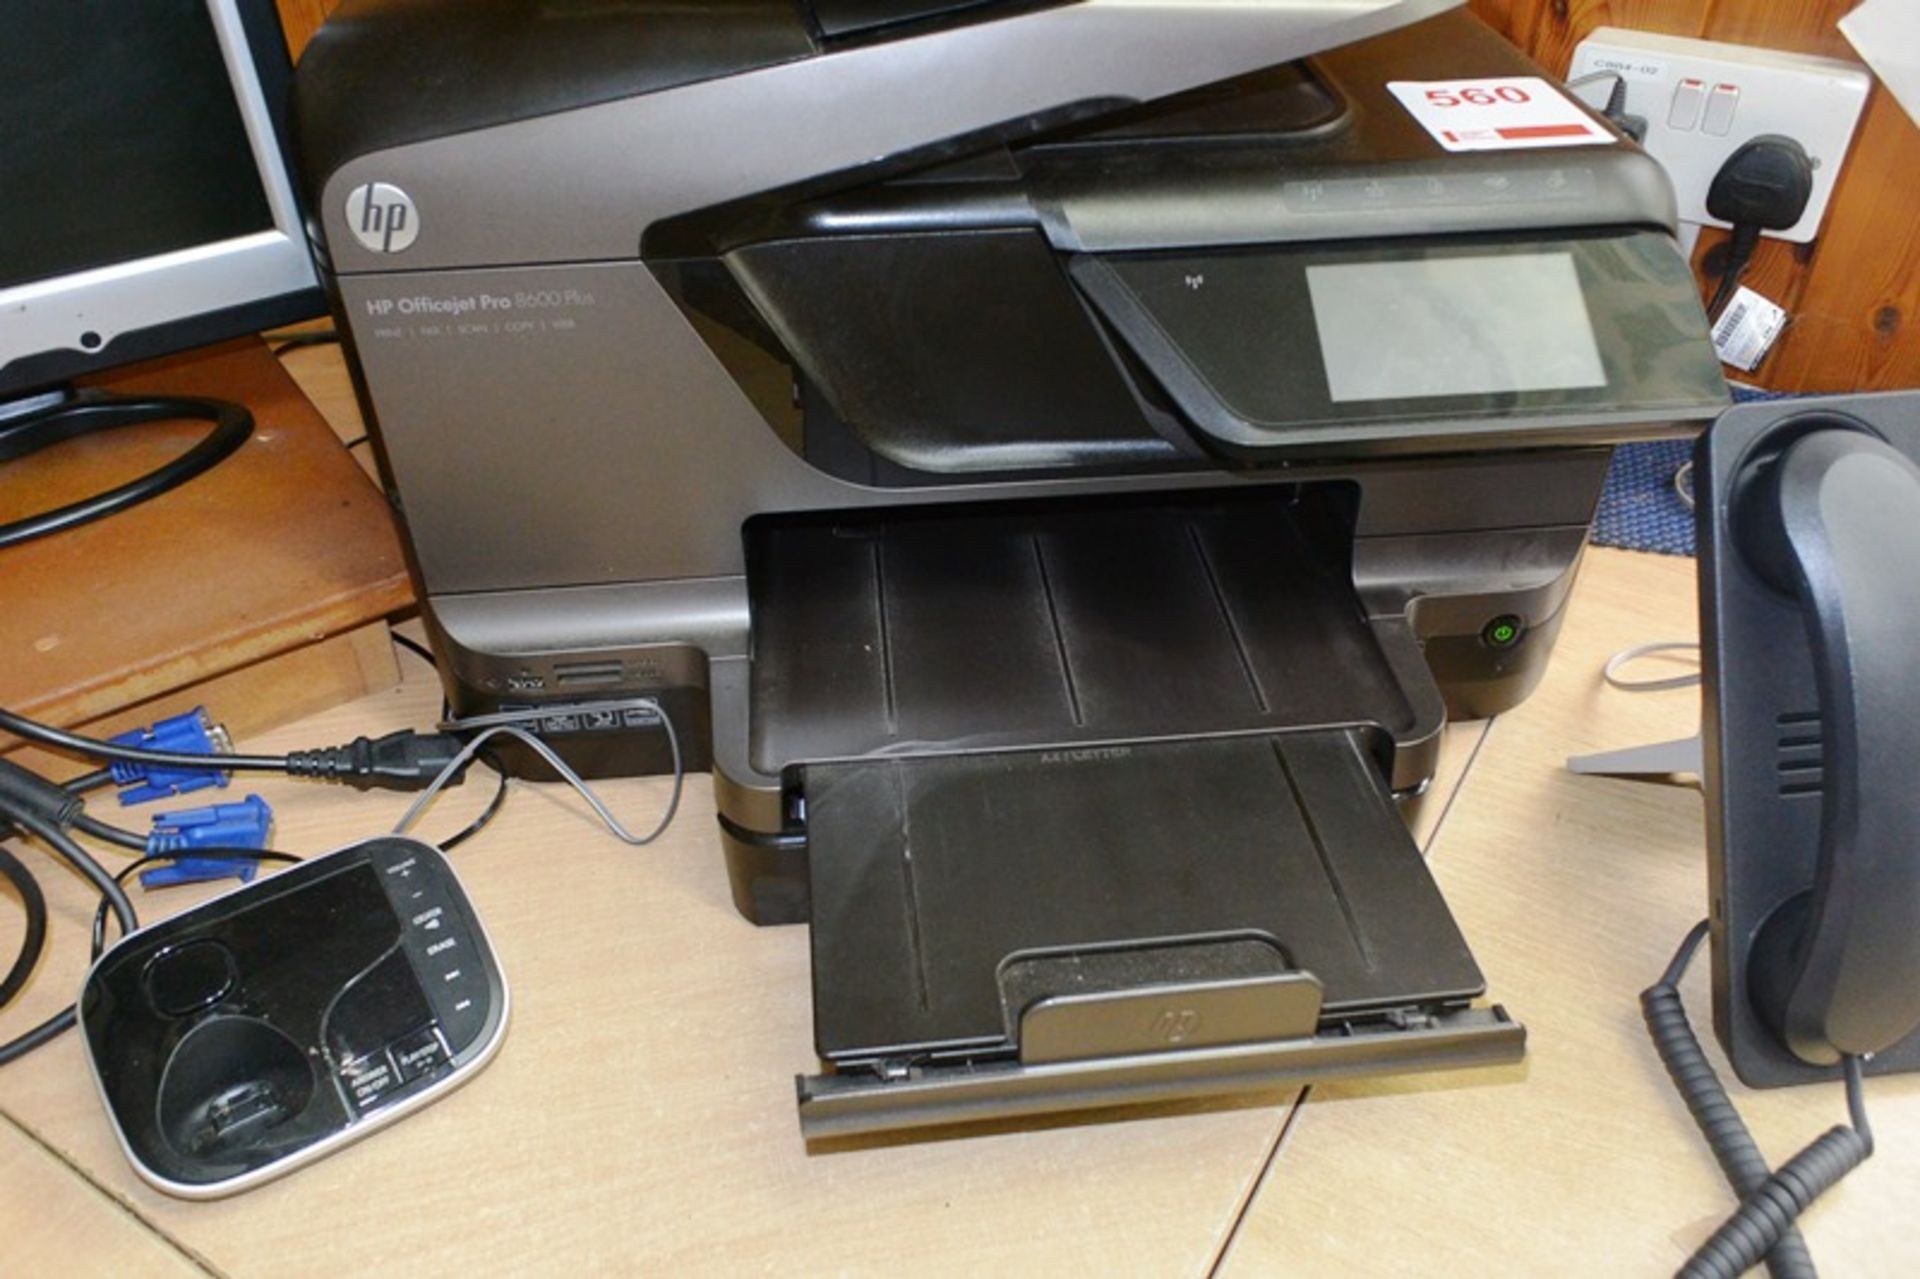 HP Officejet Pro 8600 plus all-in-one print, fax, scan & copy